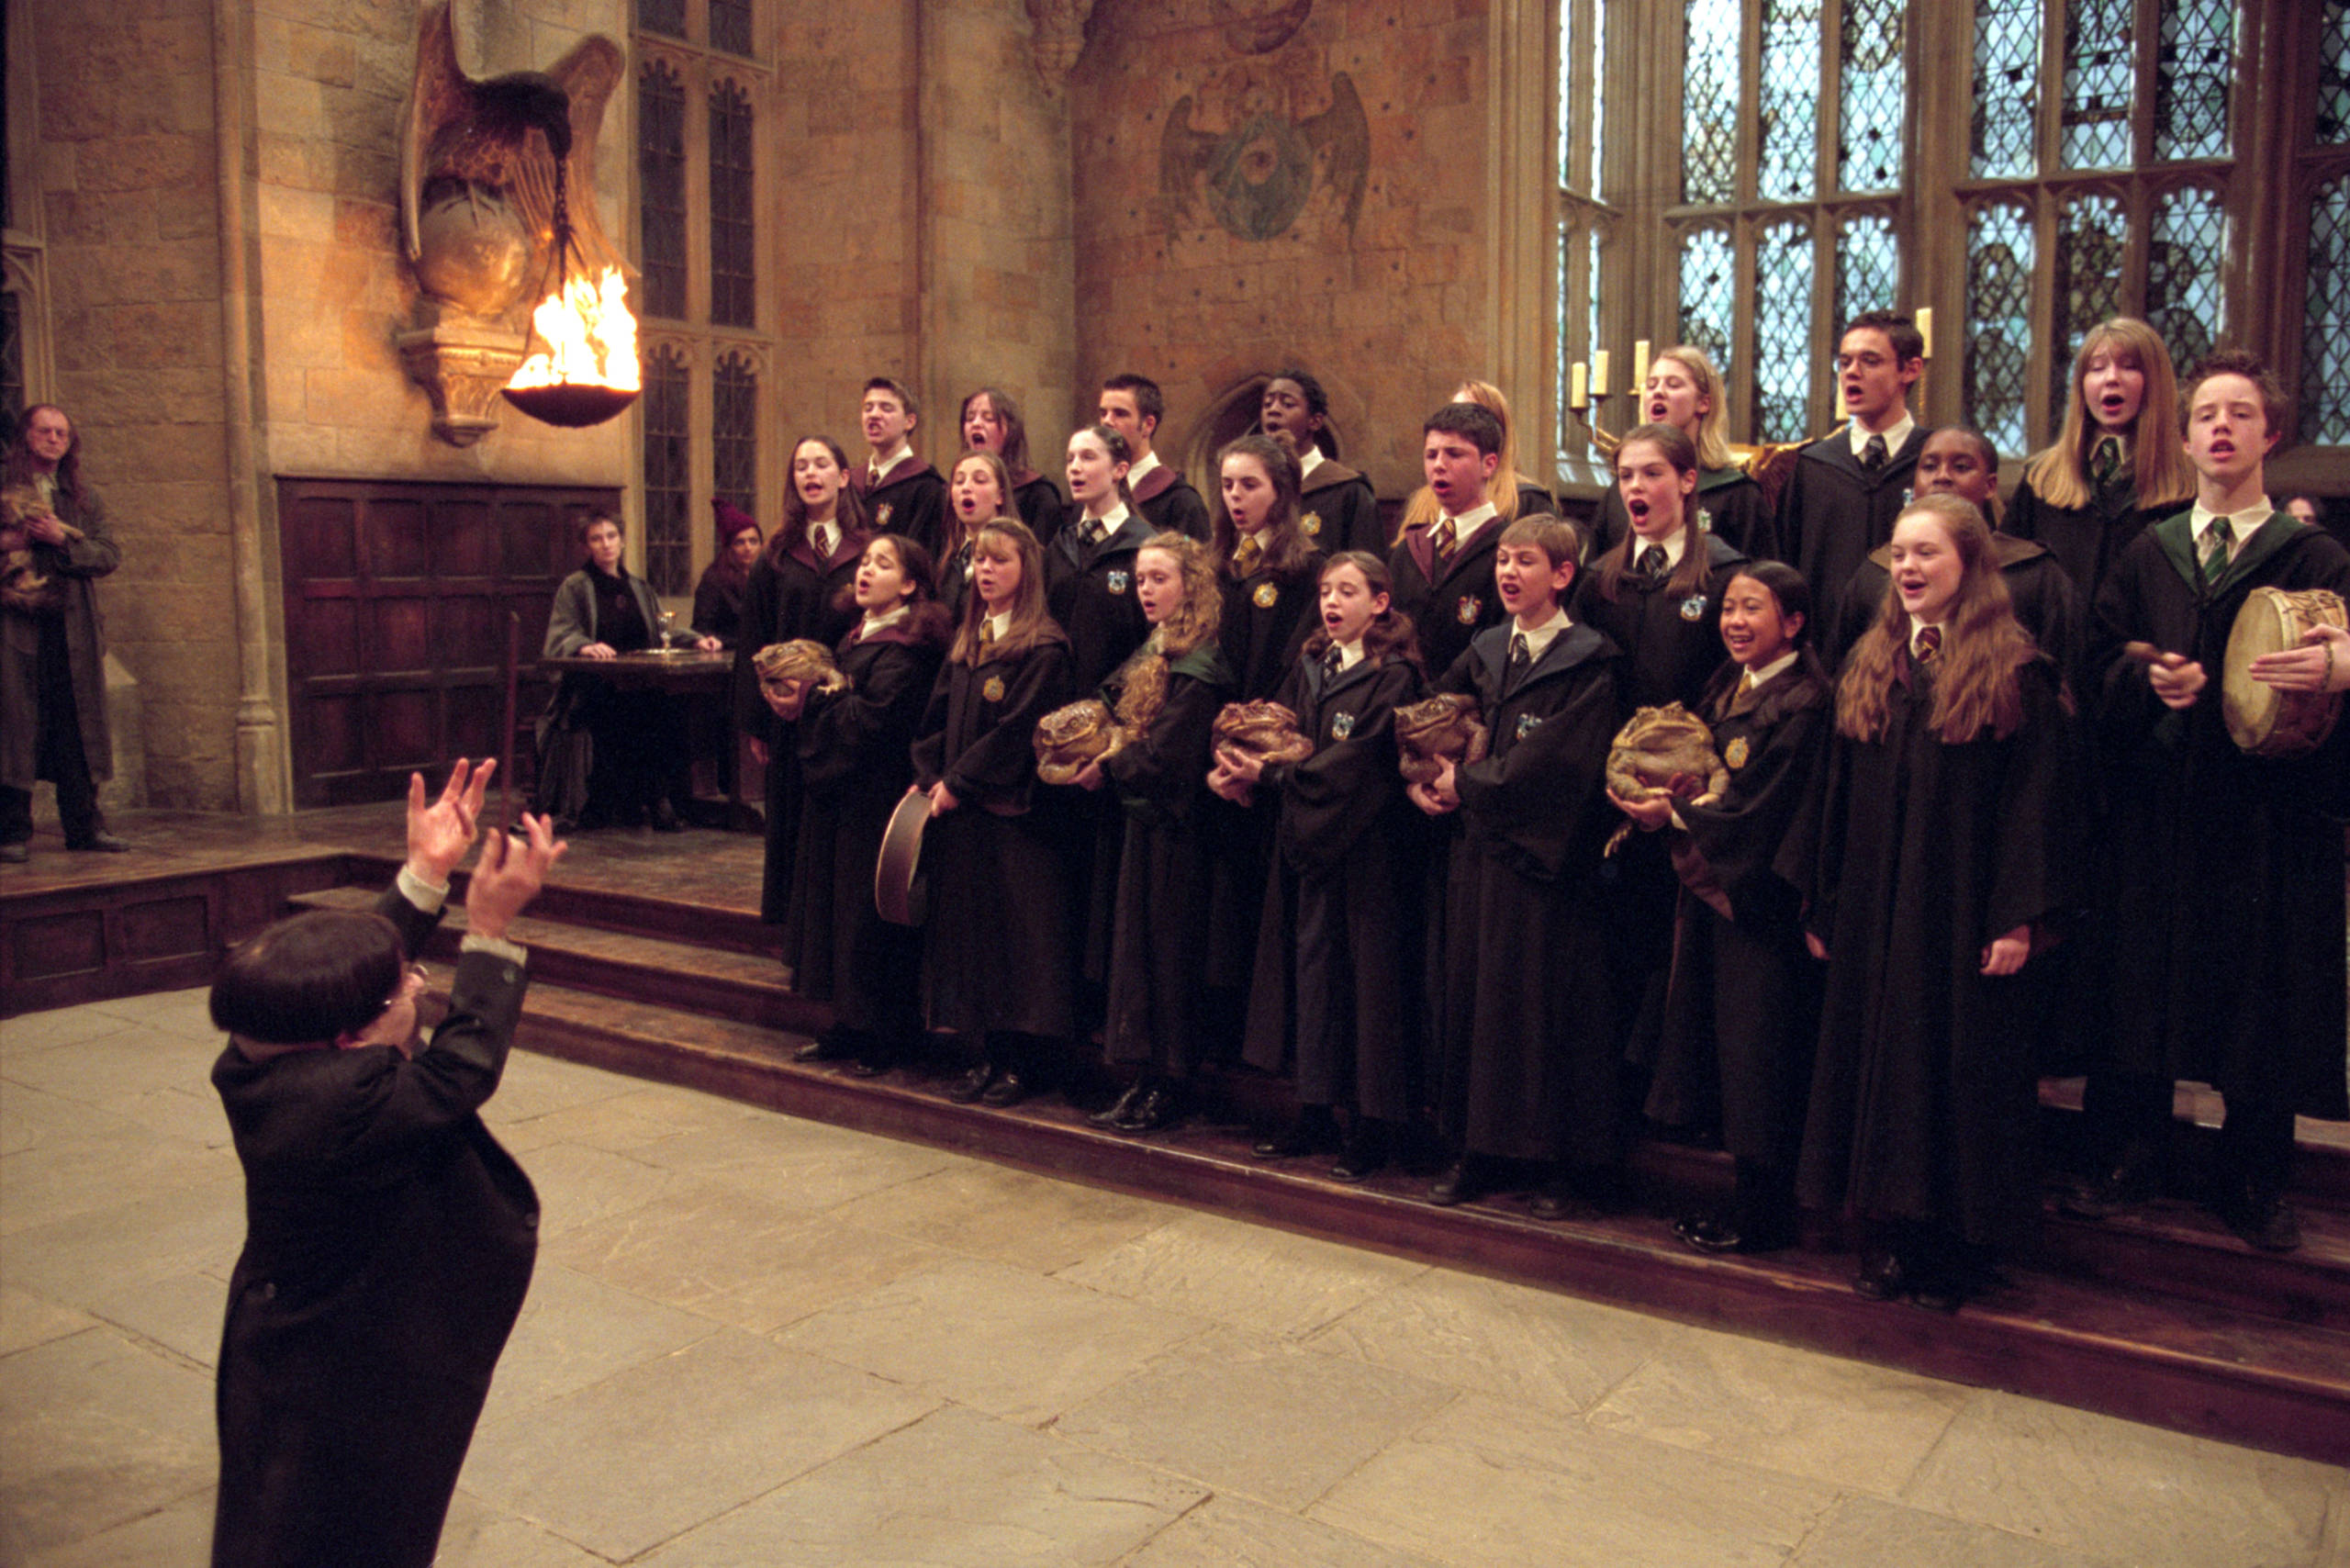 Flitwick conducts the school choir.